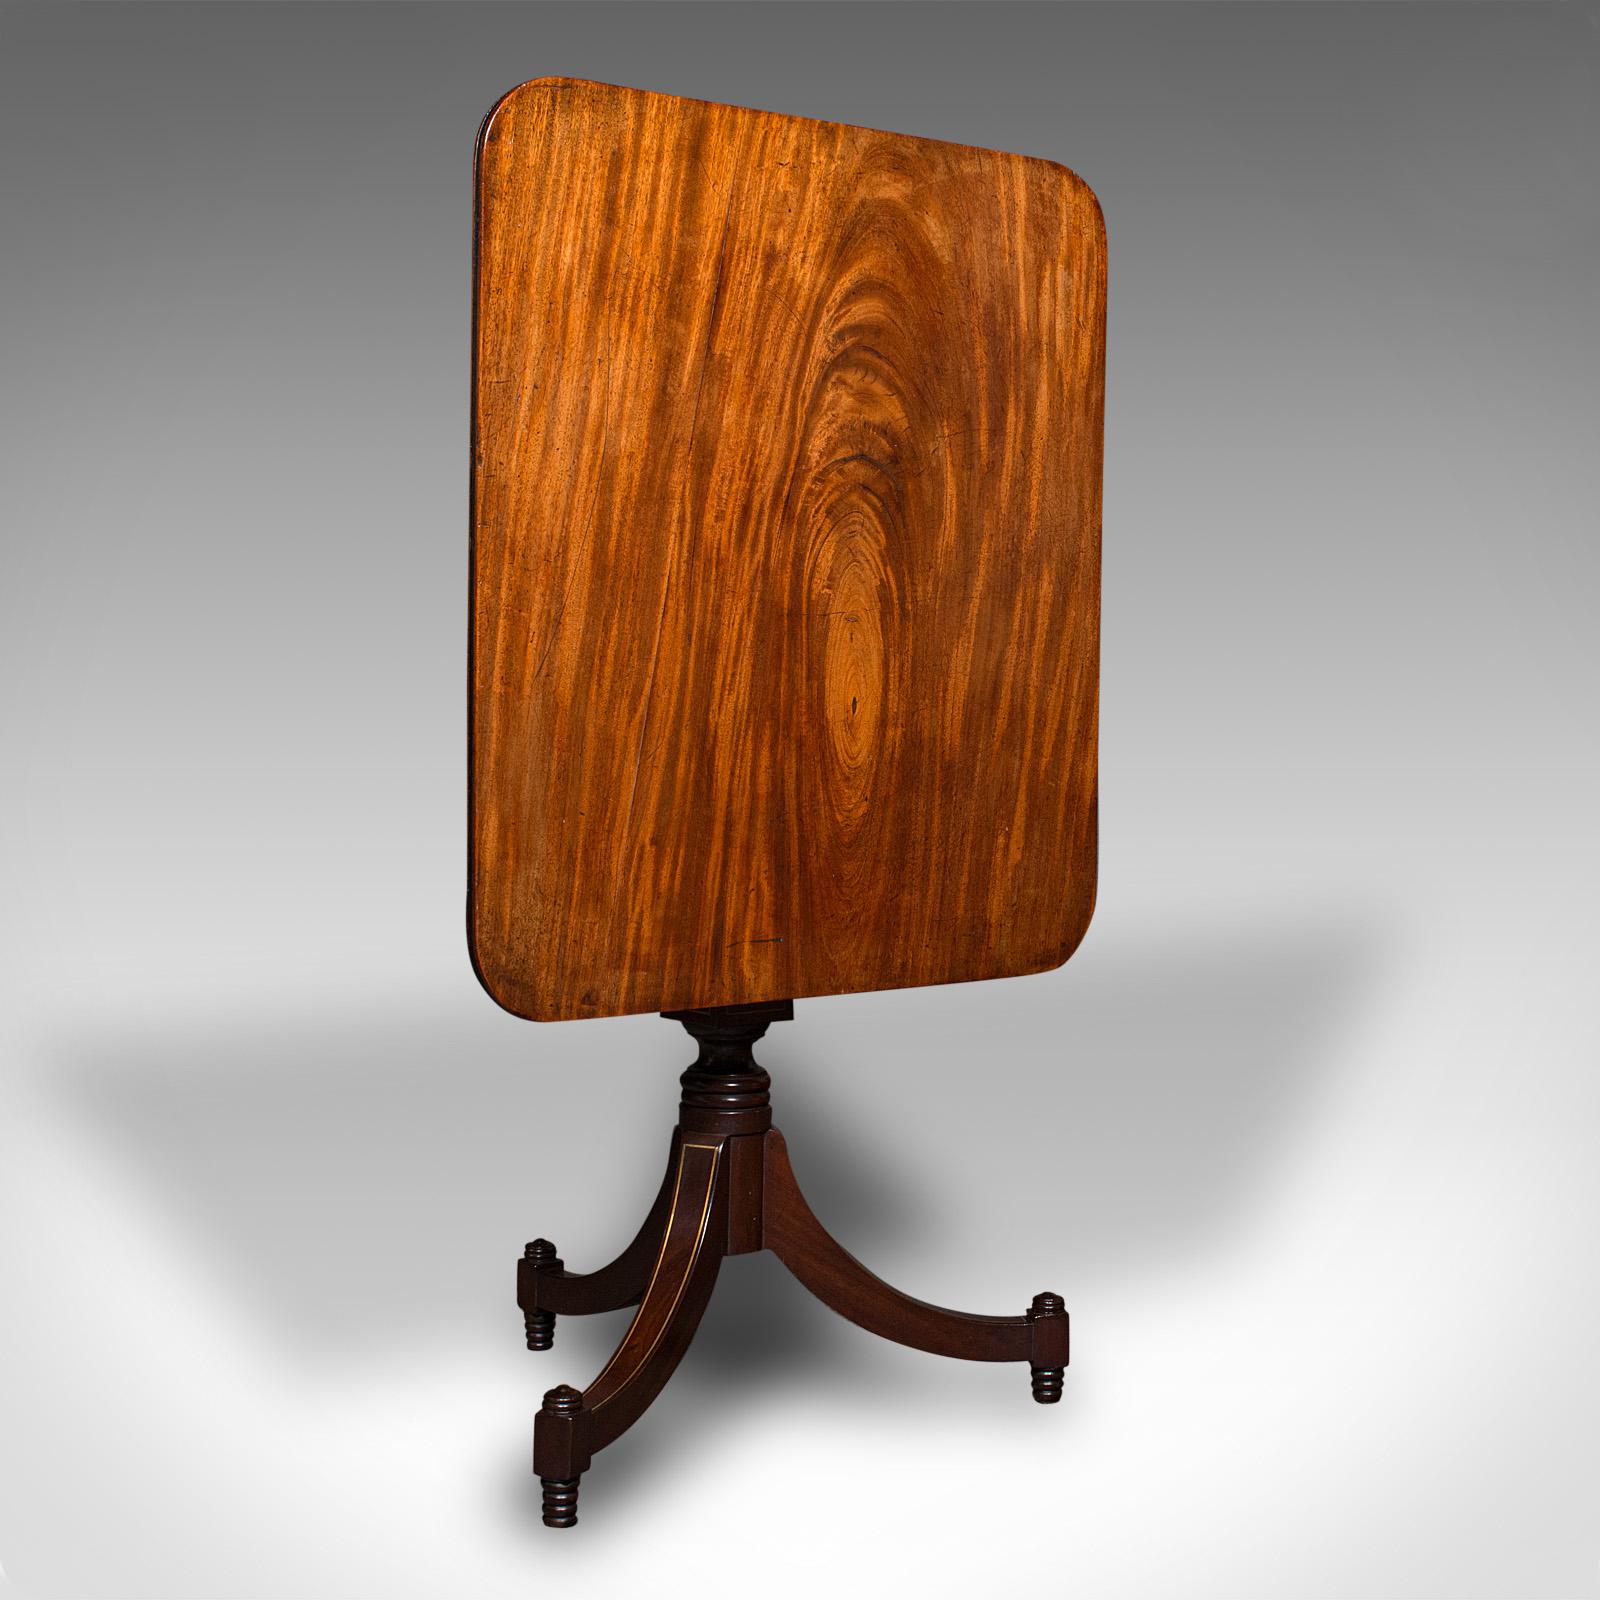 This is an antique occasional table. An English, mahogany tilt-top lamp or wine table, dating to the Regency period, circa 1820.

Distinctive appearance, with superb colour and appealing form
Displaying a desirable aged patina and in good